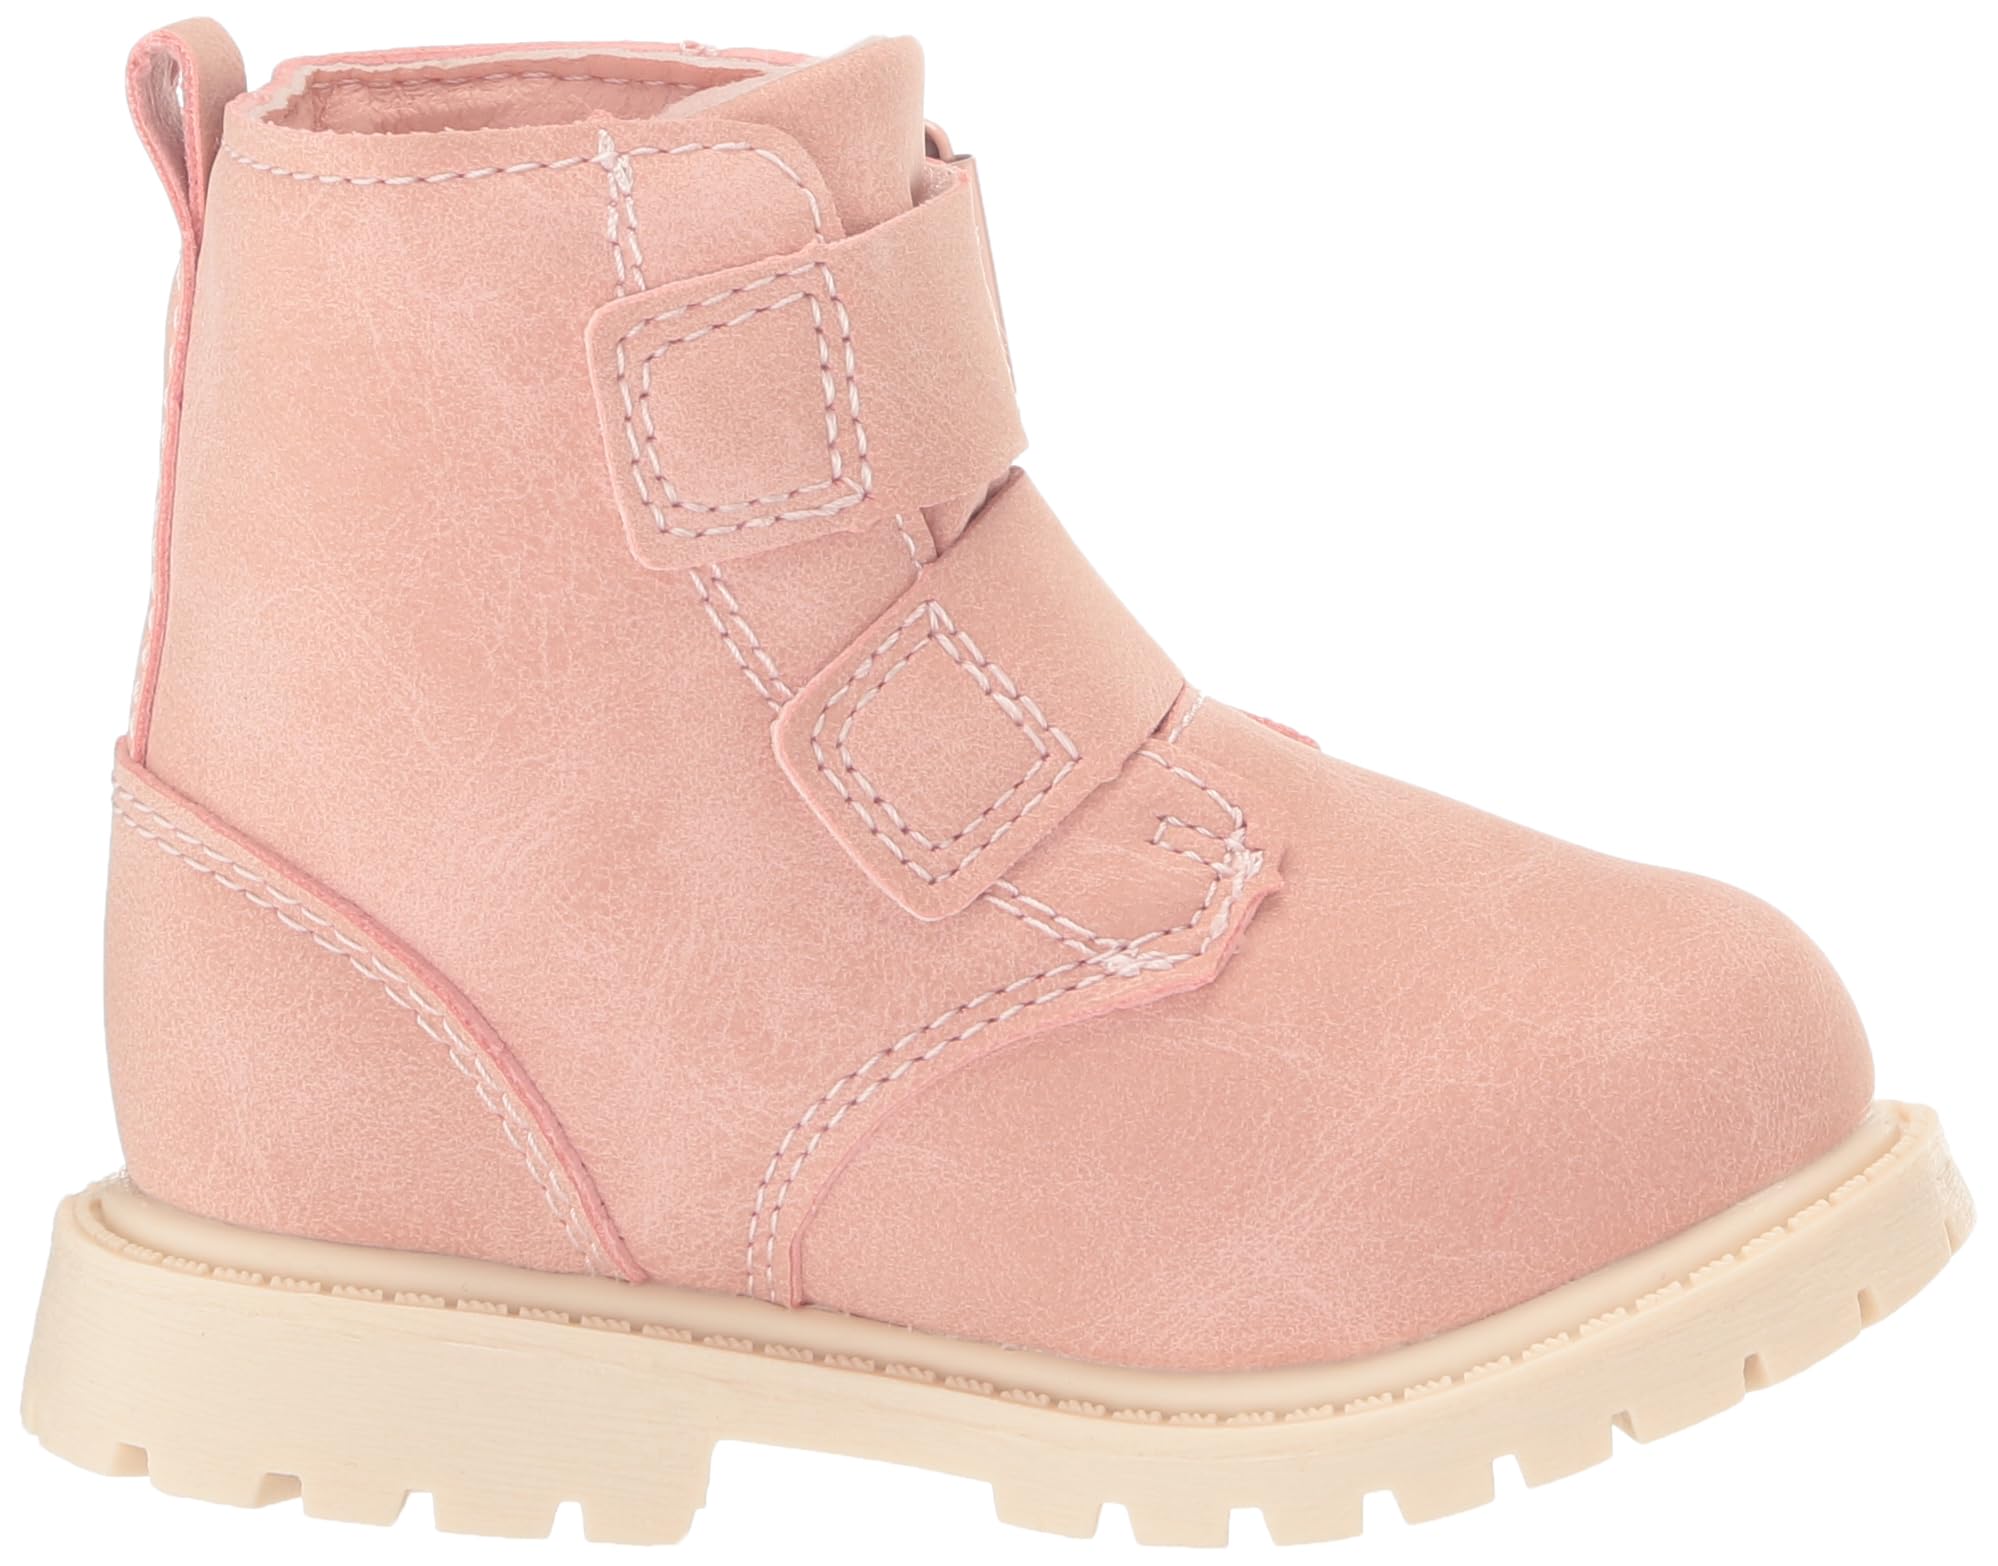 Carter's Unisex-Child Clary Boot